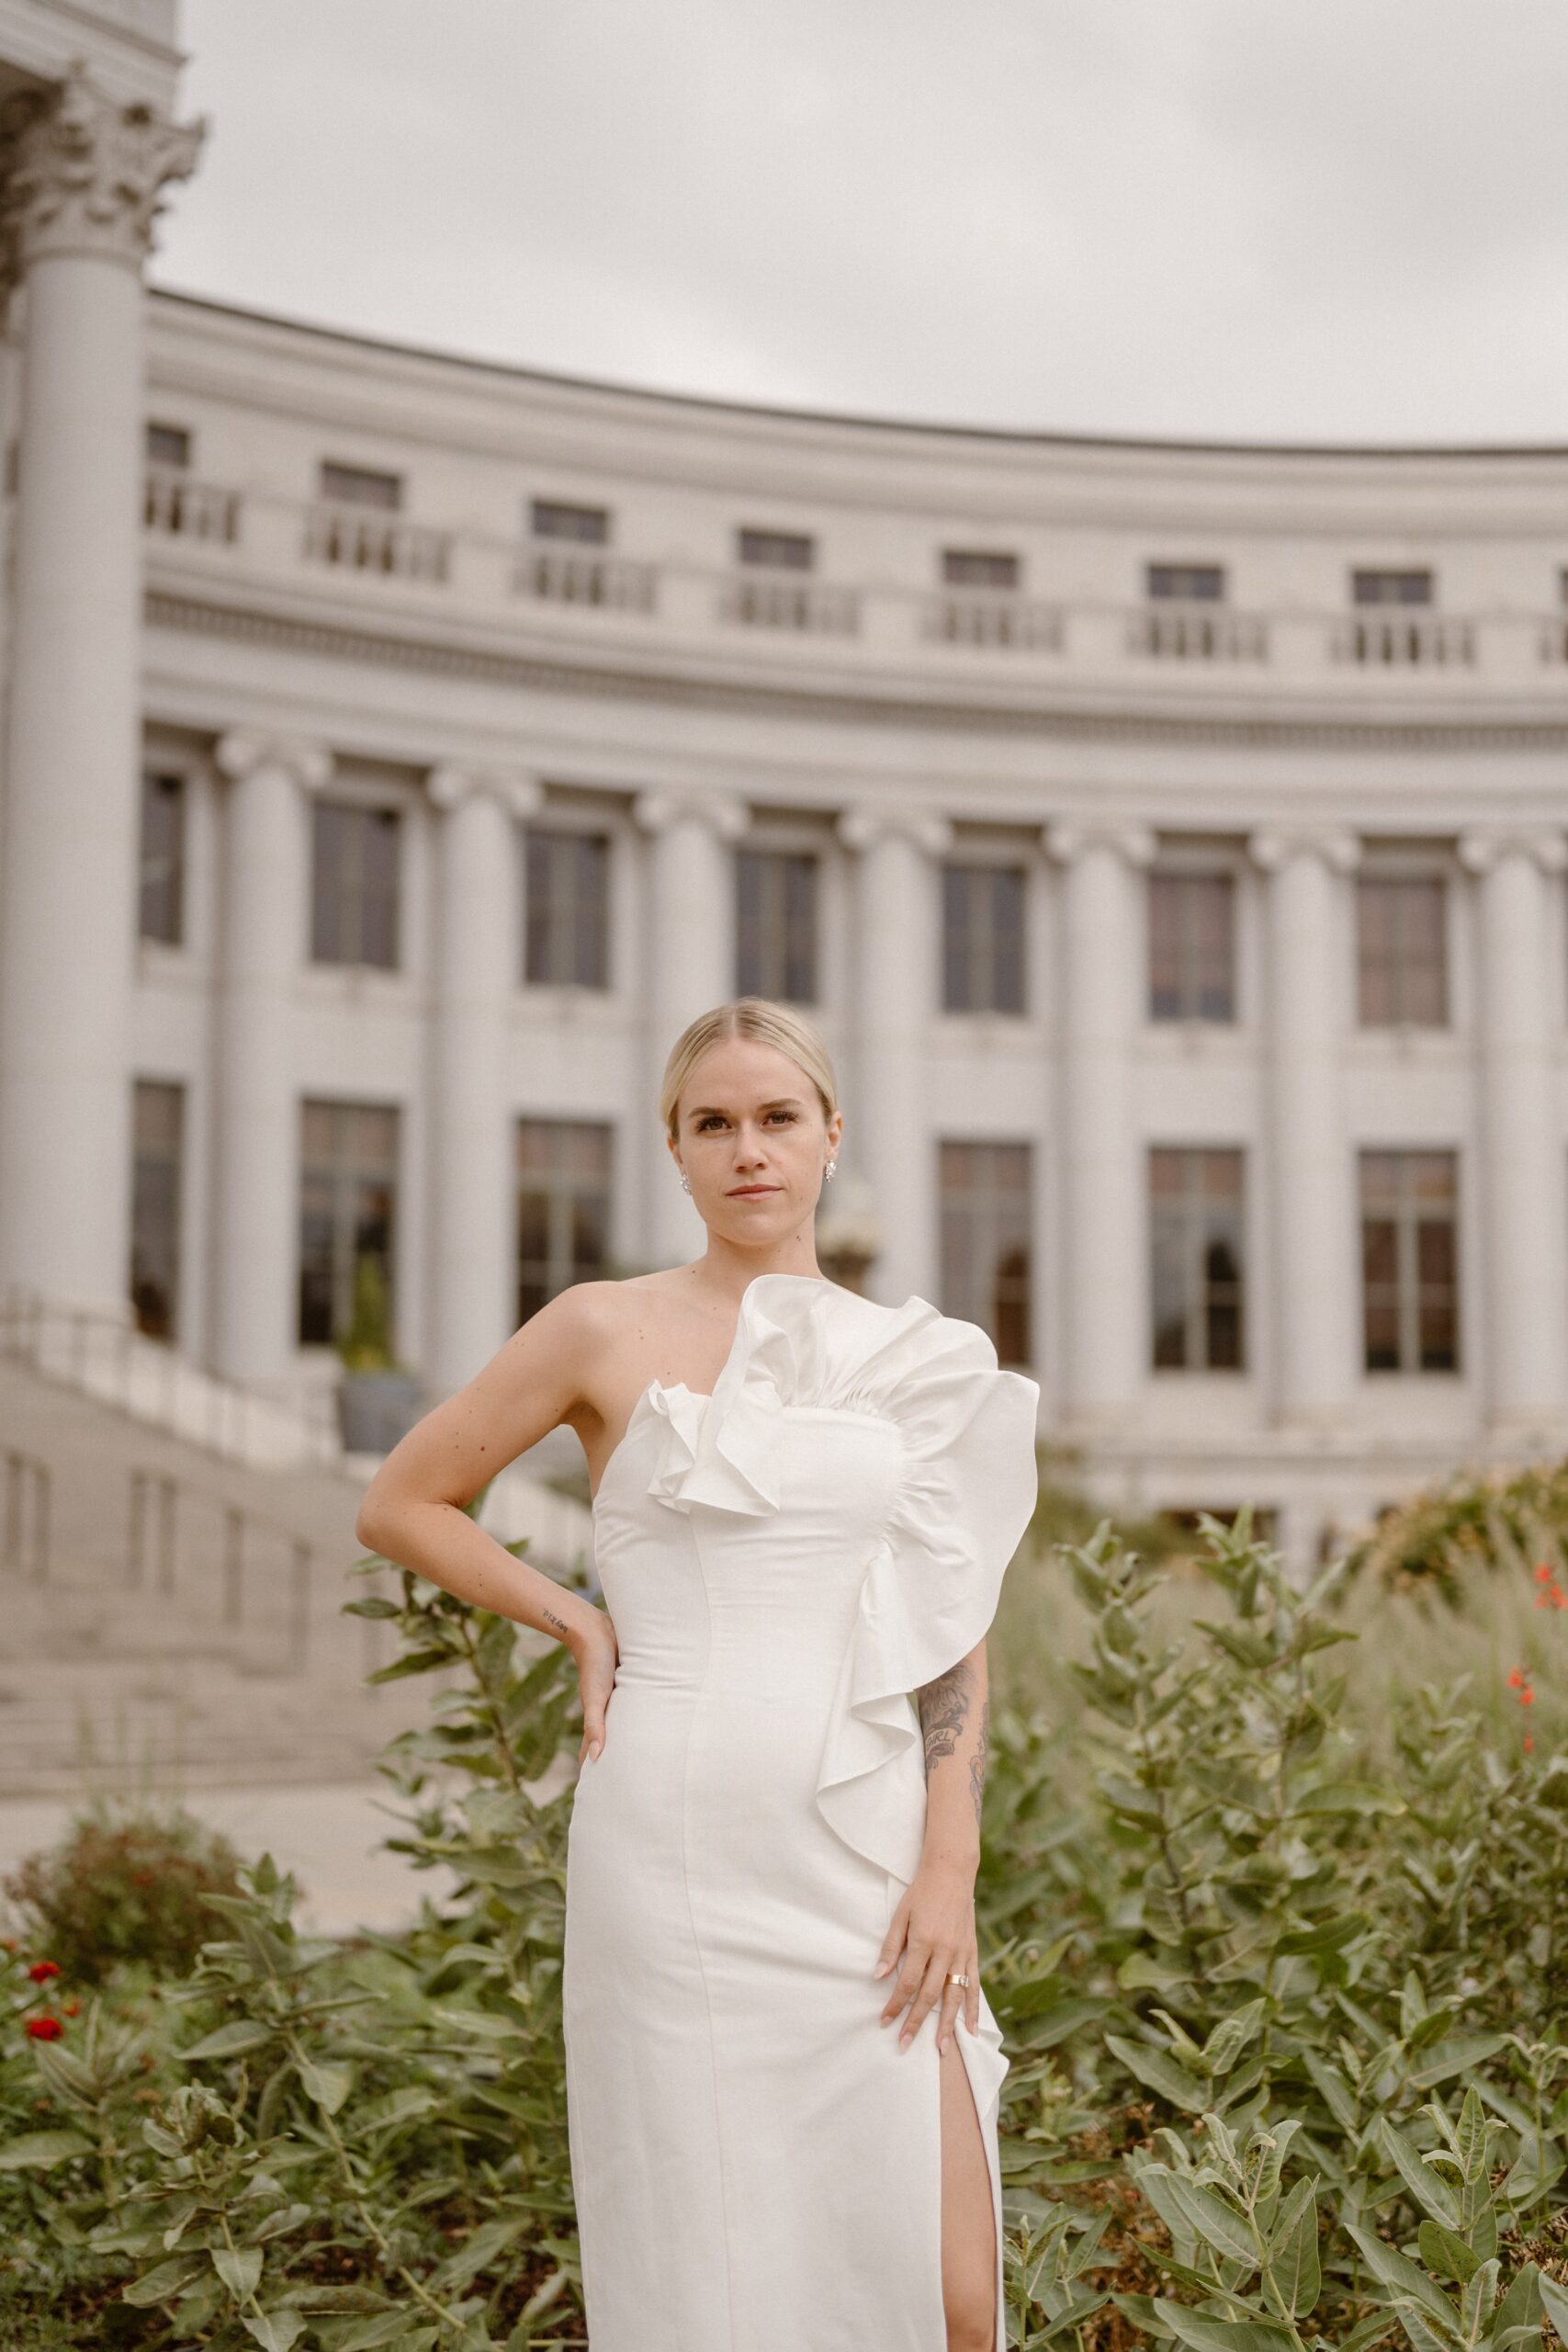 A bride poses for her wedding portraits in front of the Denver courthouse. Photo by Colorado wedding photographer Ashley Joyce.